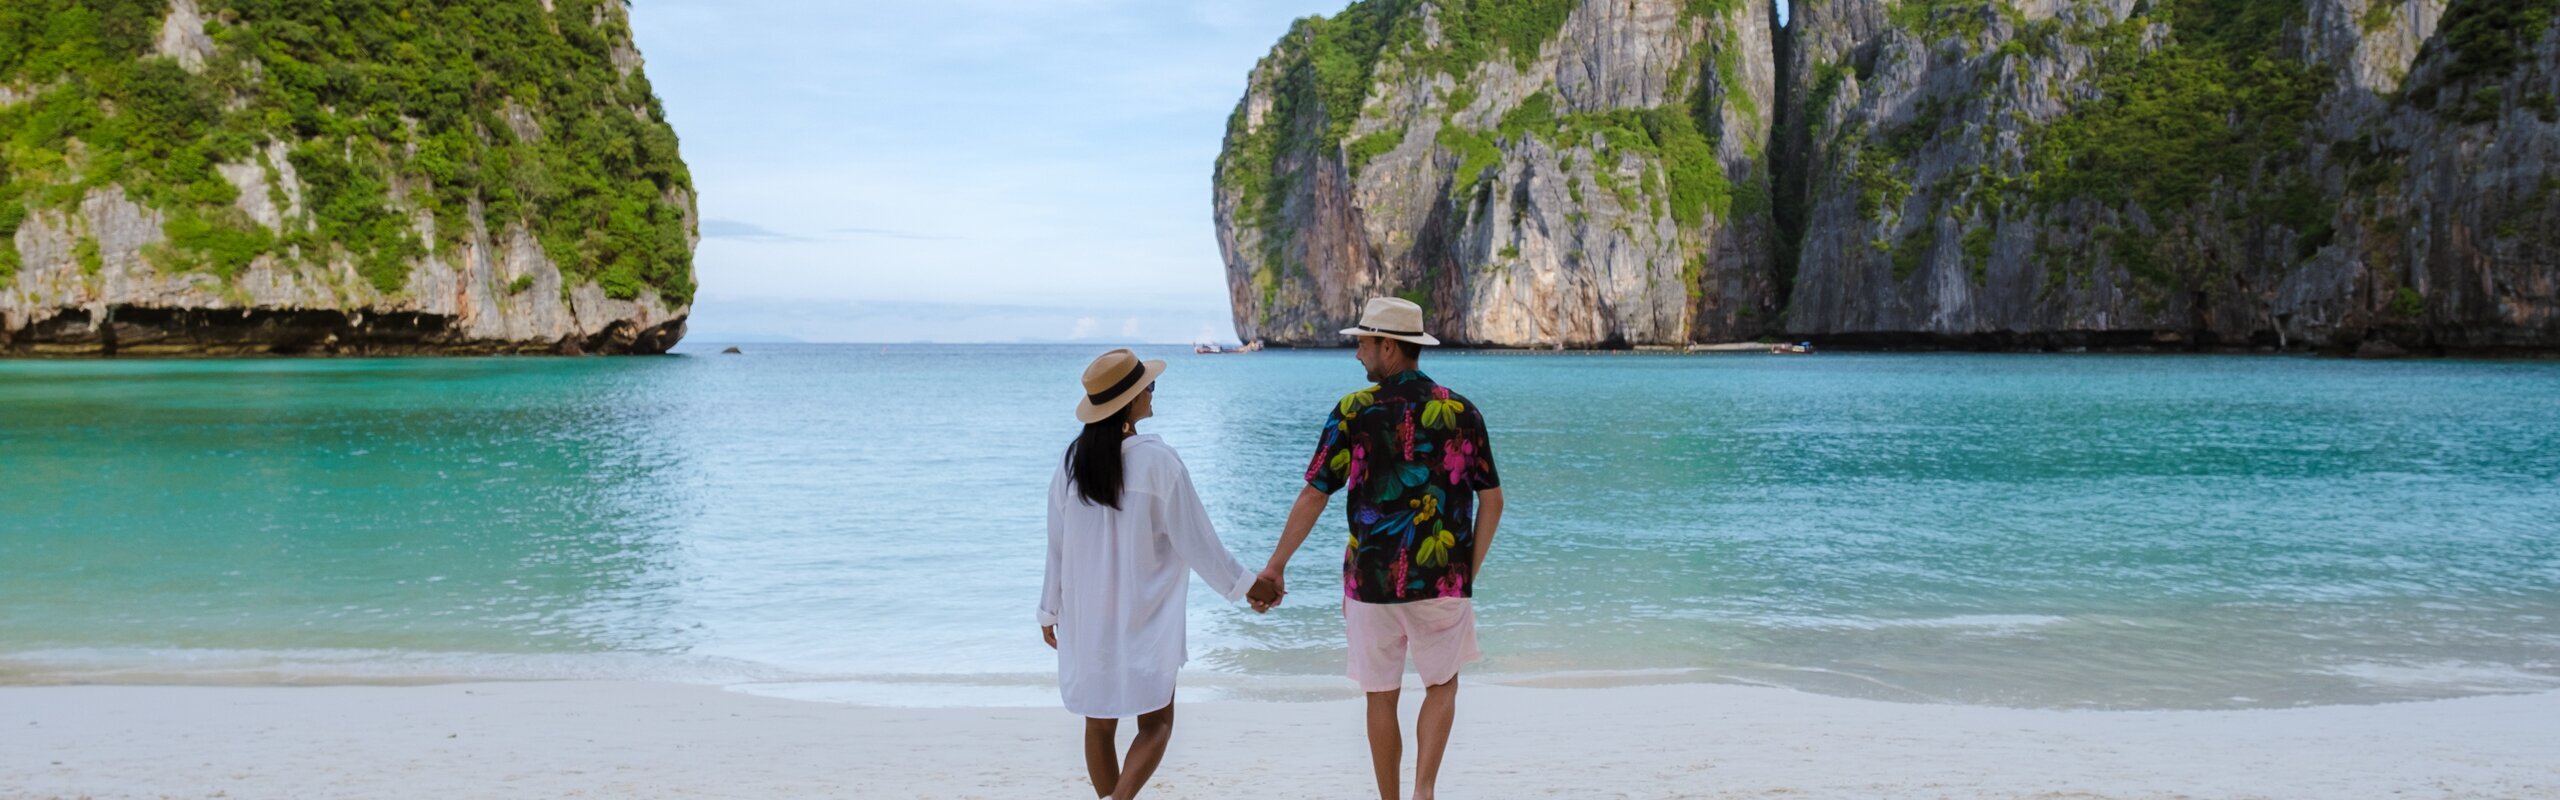 Thailand, Cambodia and Vietnam Tours for Couples